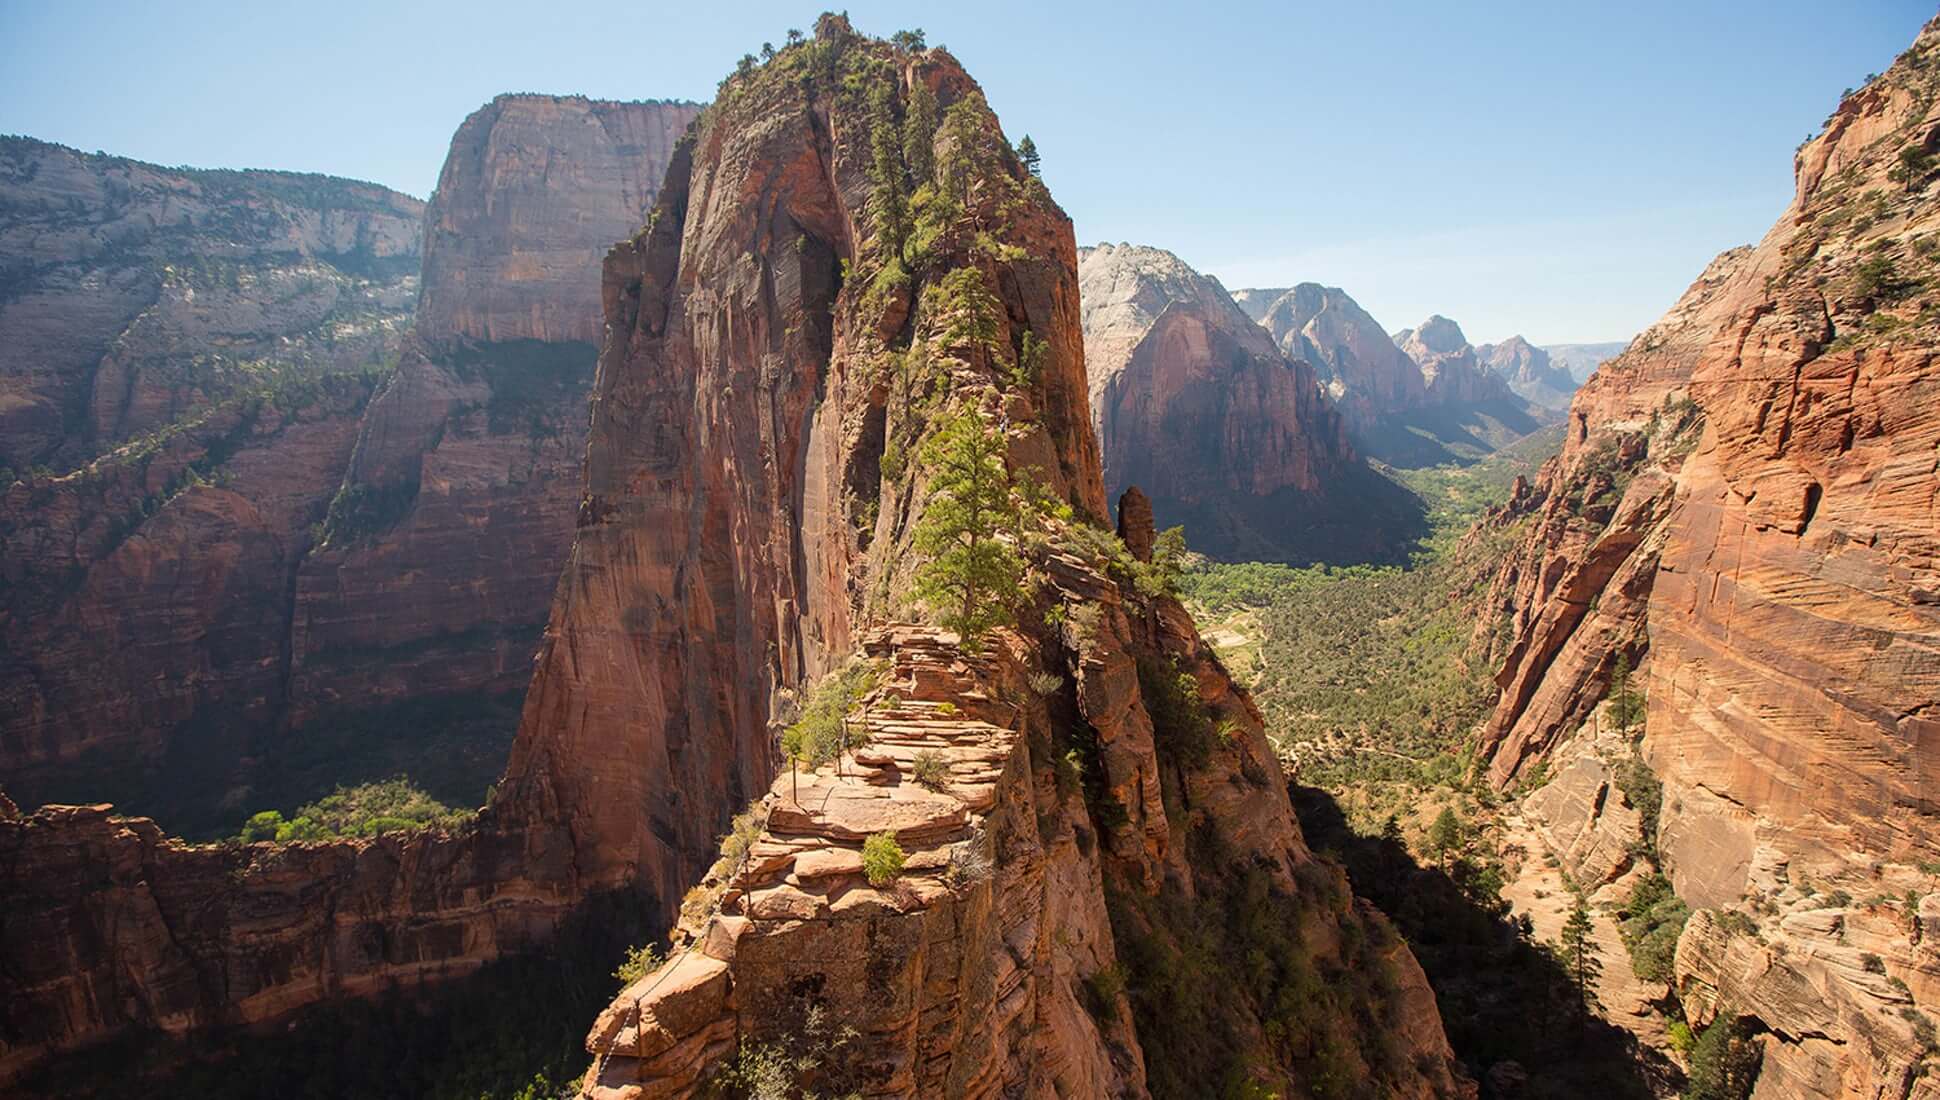 Zion national park, huge peaks and views at roofnest national park highlight